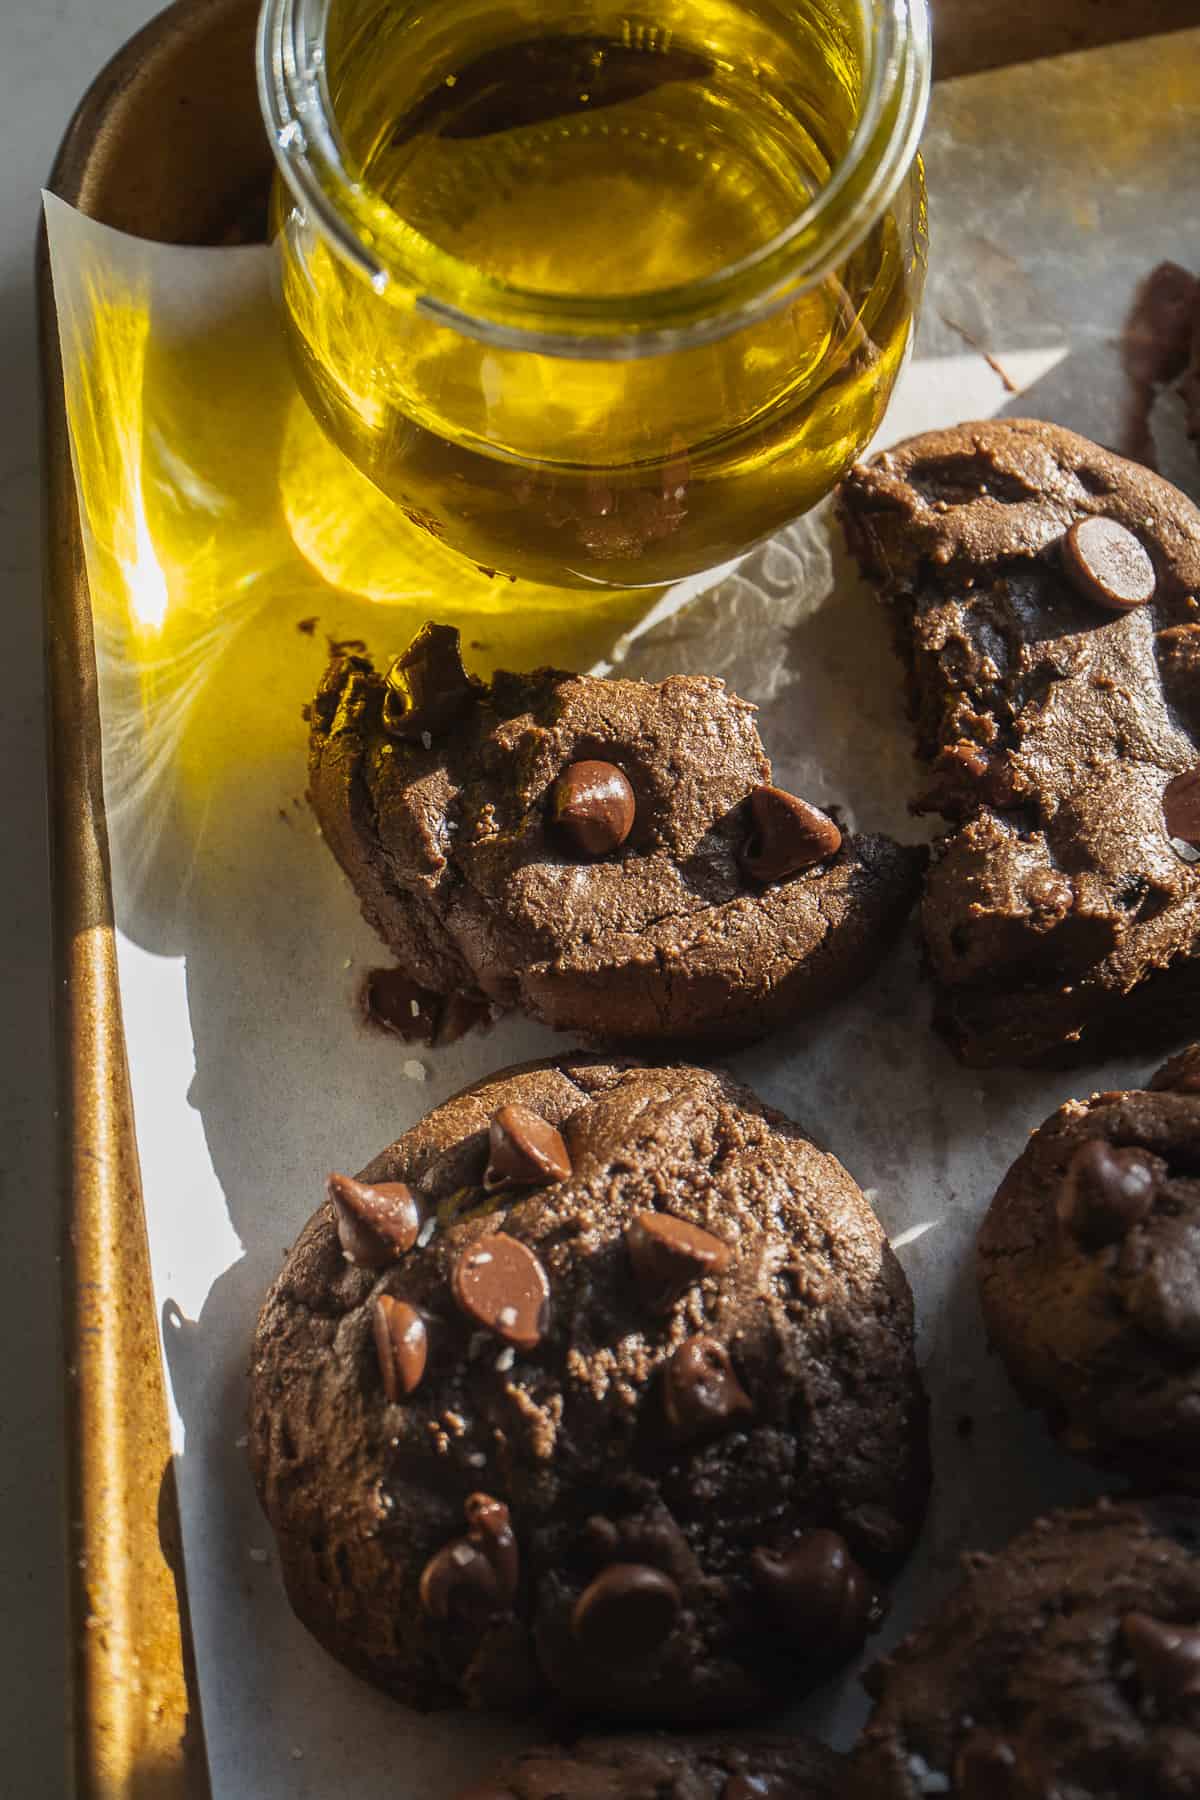 Olive oil cookies with chocolate chips on a baking sheet with a jar of olive oil.